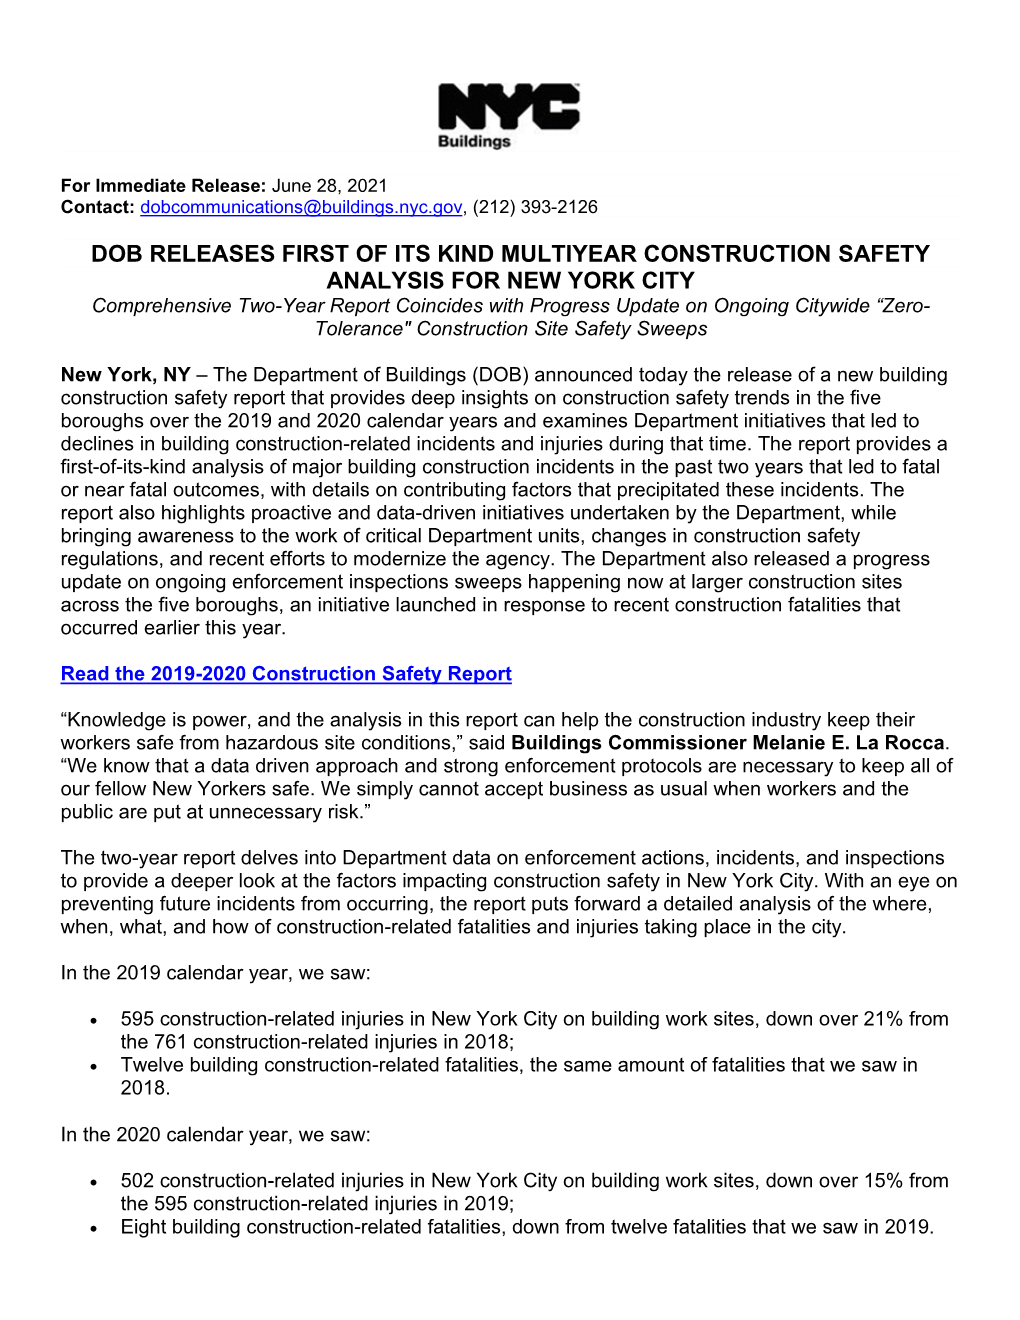 Dob Releases First of Its Kind Multiyear Construction Safety Analysis for New York City